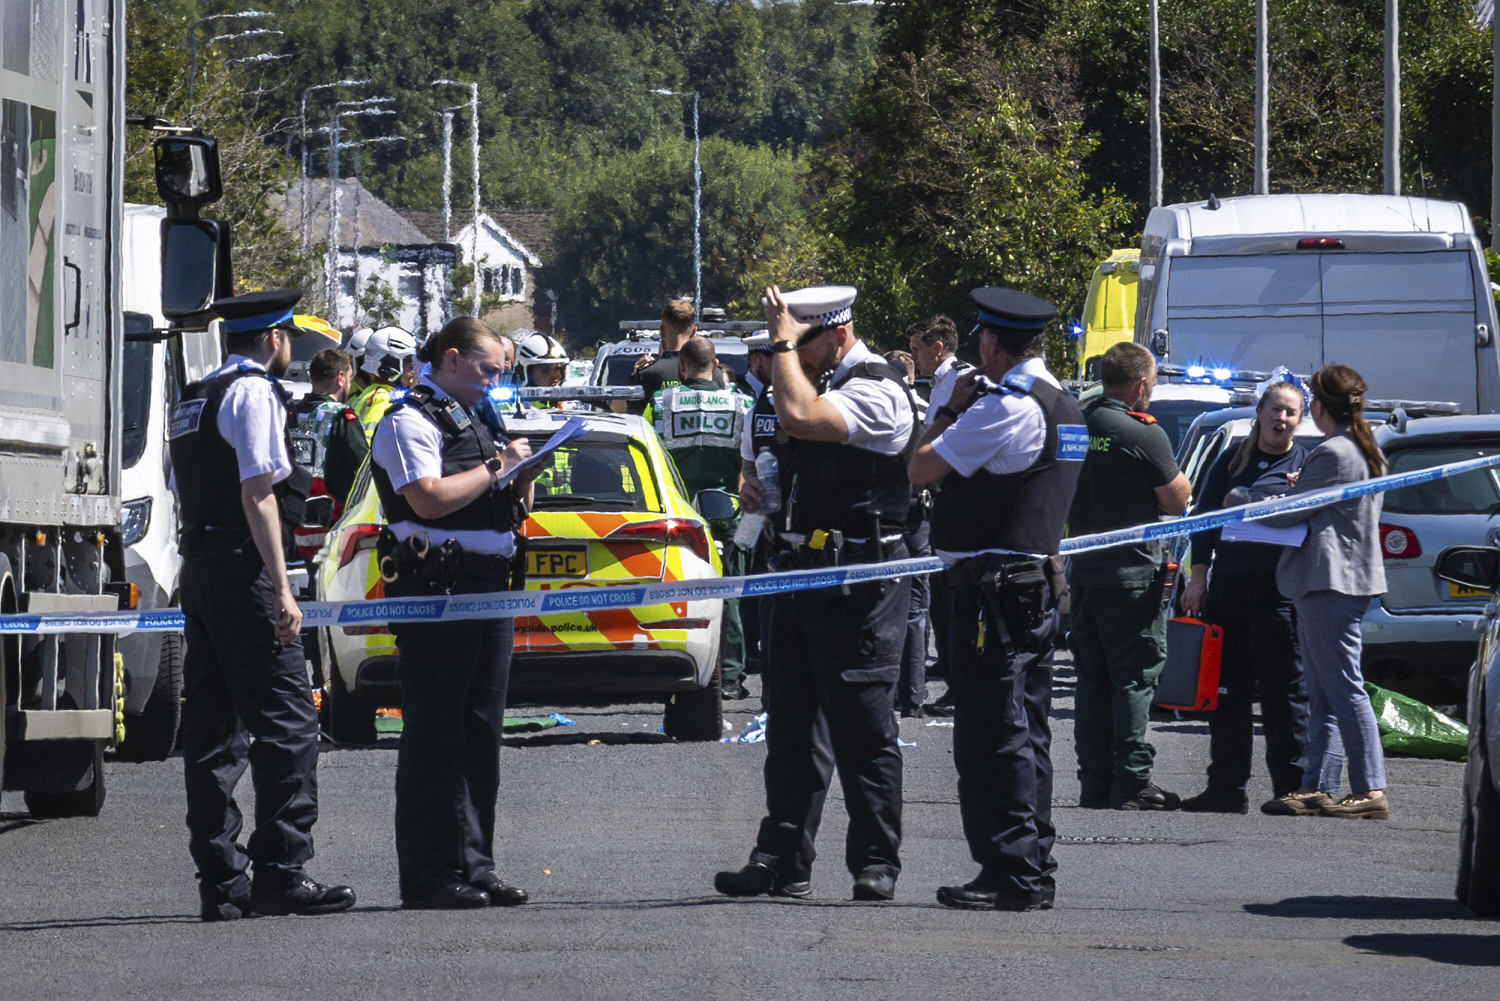 At least one child dead, seven others injured in stabbing attack in U.K.